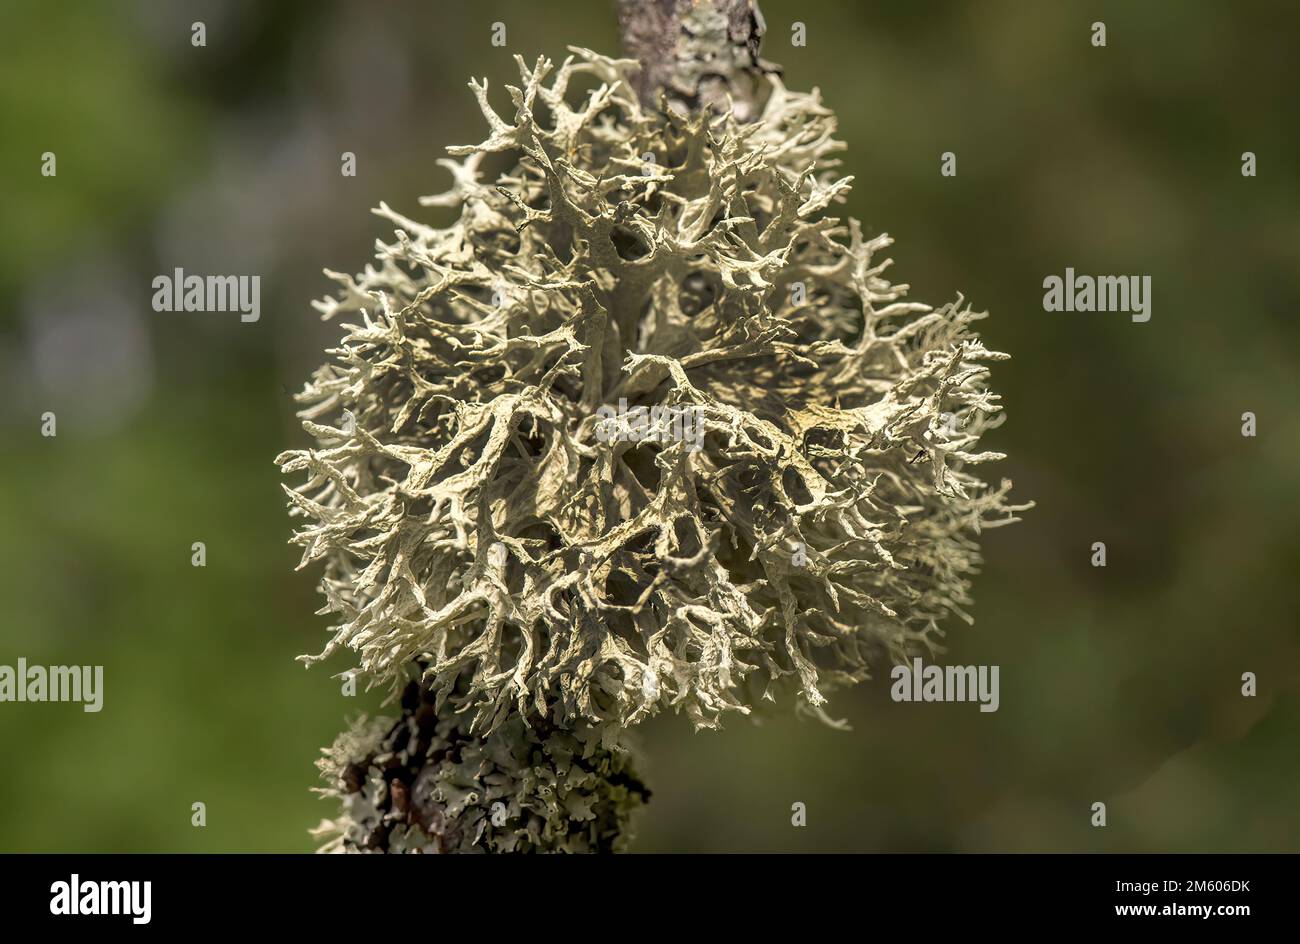 lichen (parmelia sulcata) growing on a tree, close up Stock Photo